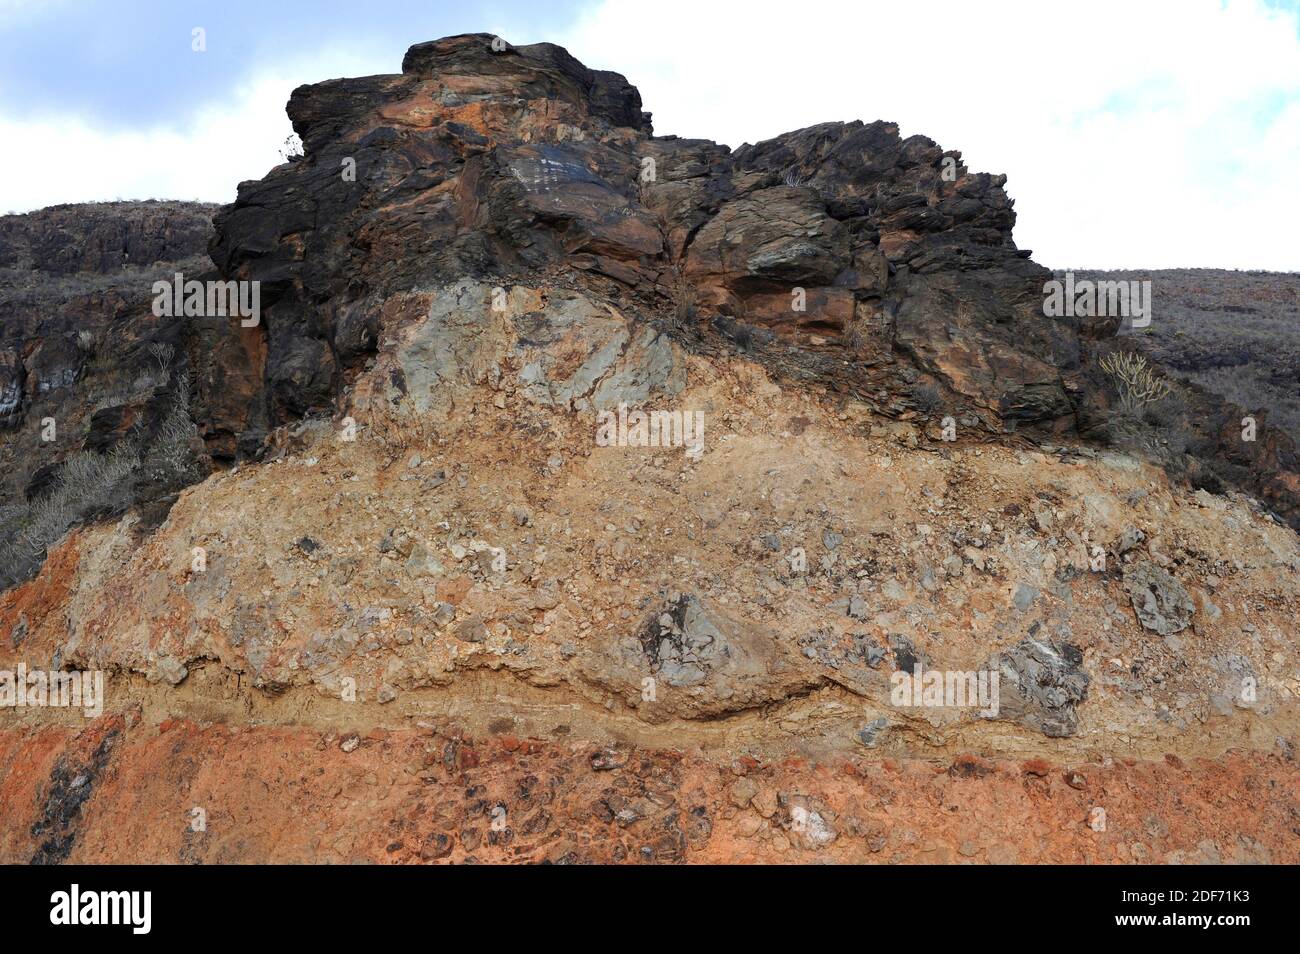 Volcanic material overlay. This photo was taken in Fataga, Gran Canaria, Canary Islands, Spain. Stock Photo